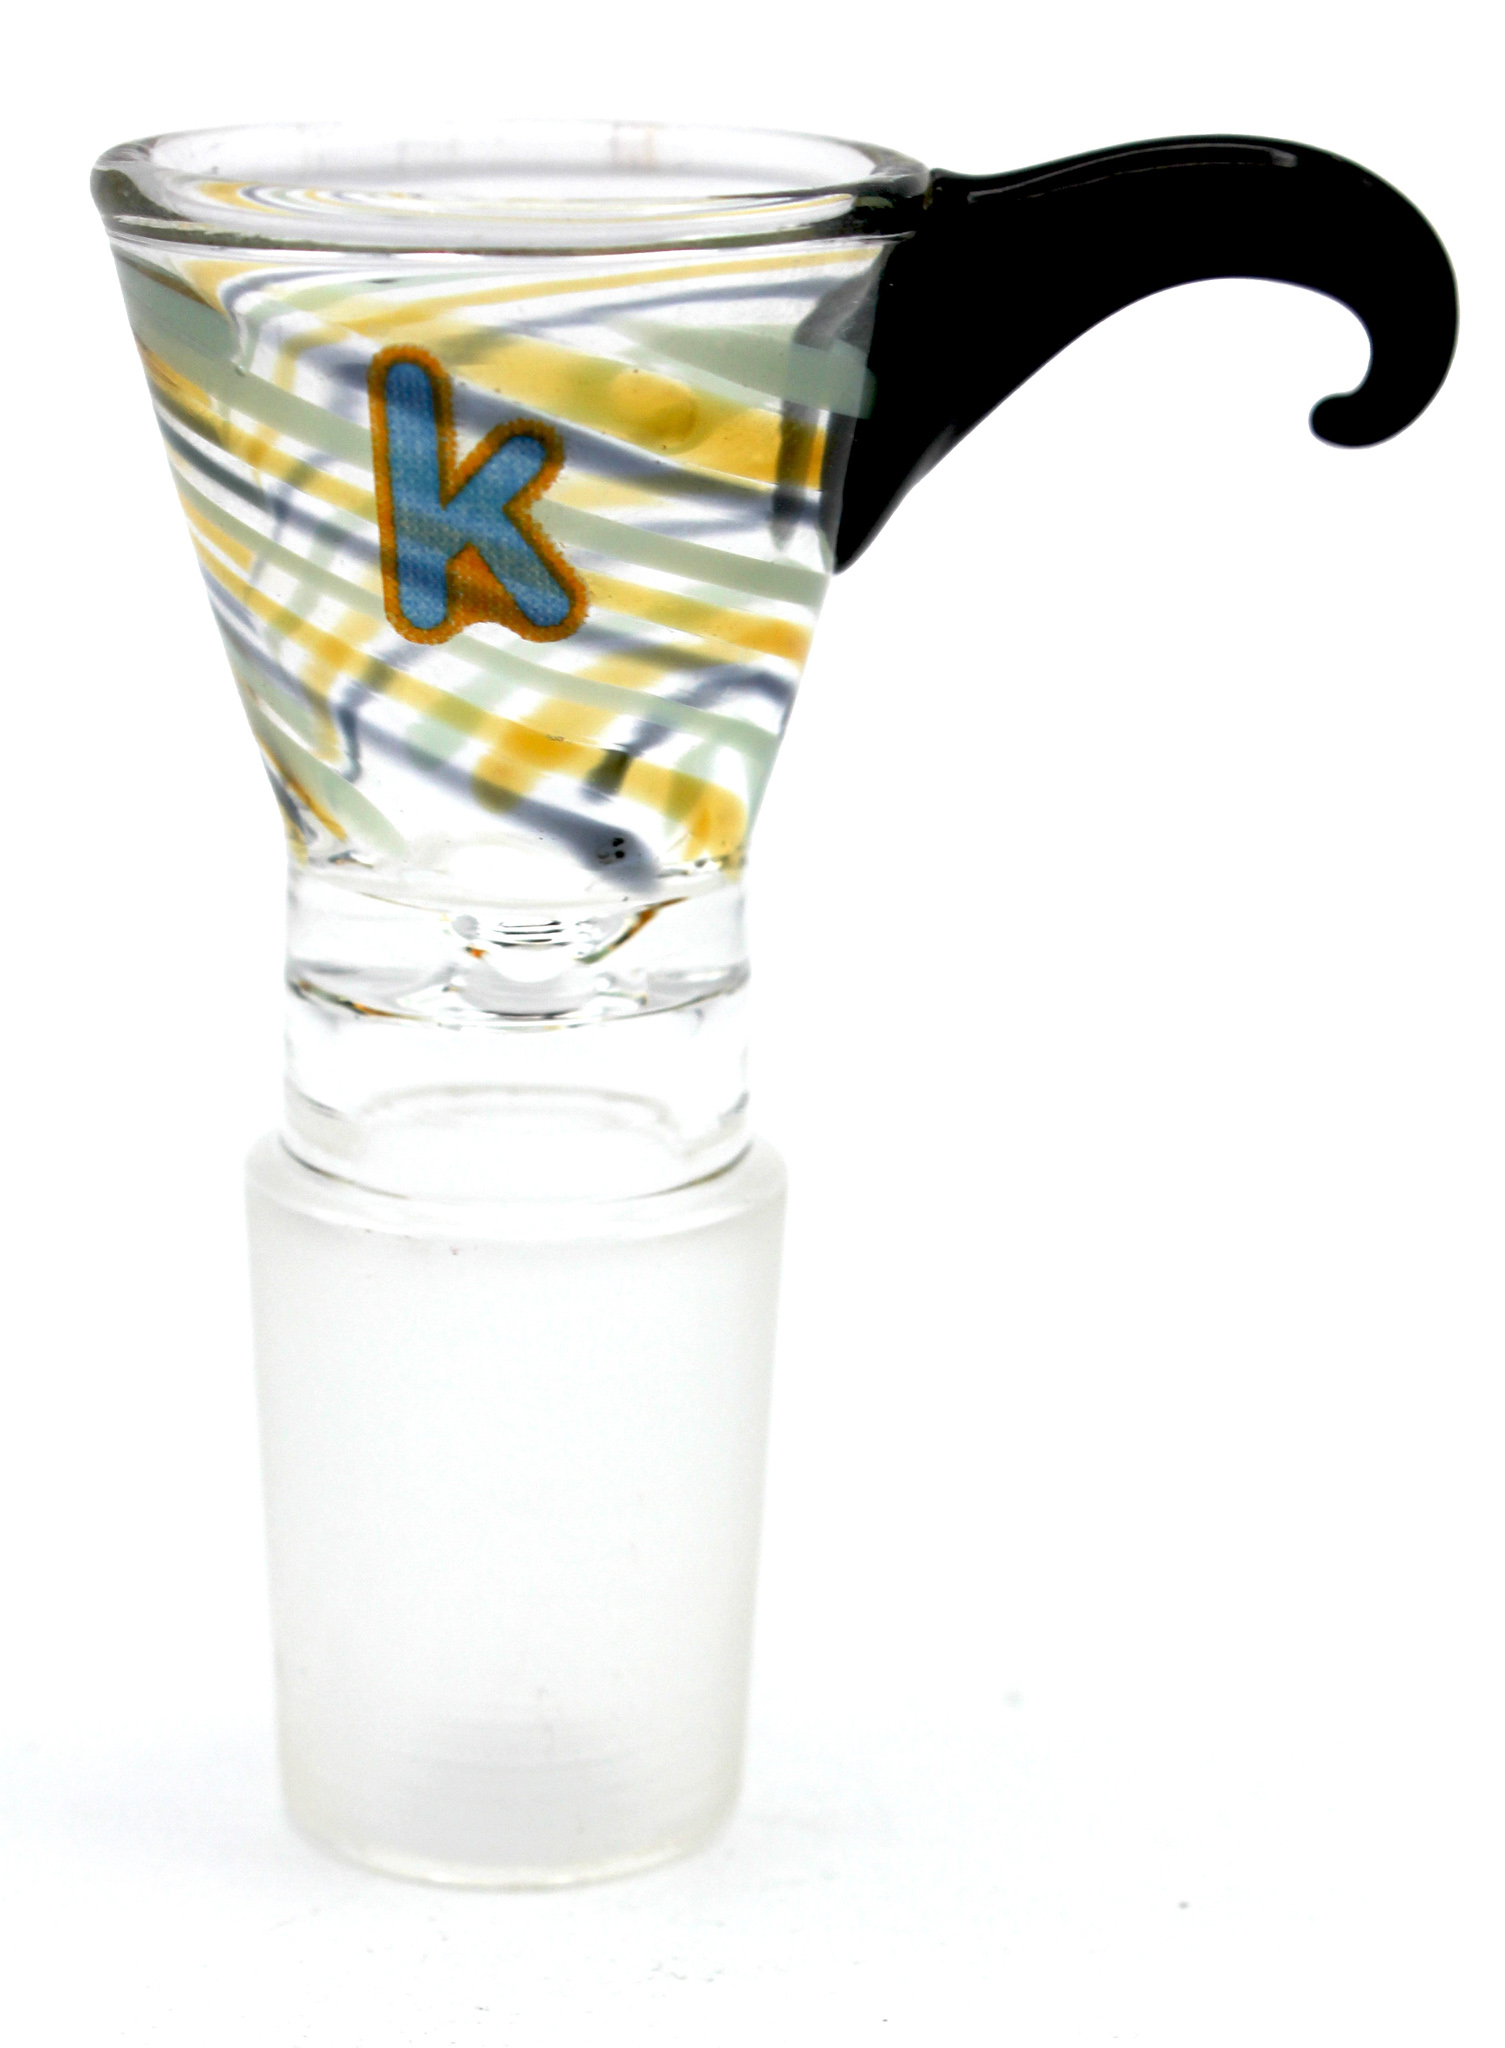 Kandy Bowl 14mm Male Funnel Bowl W/Fumed Lines Going Around & Curved Horn